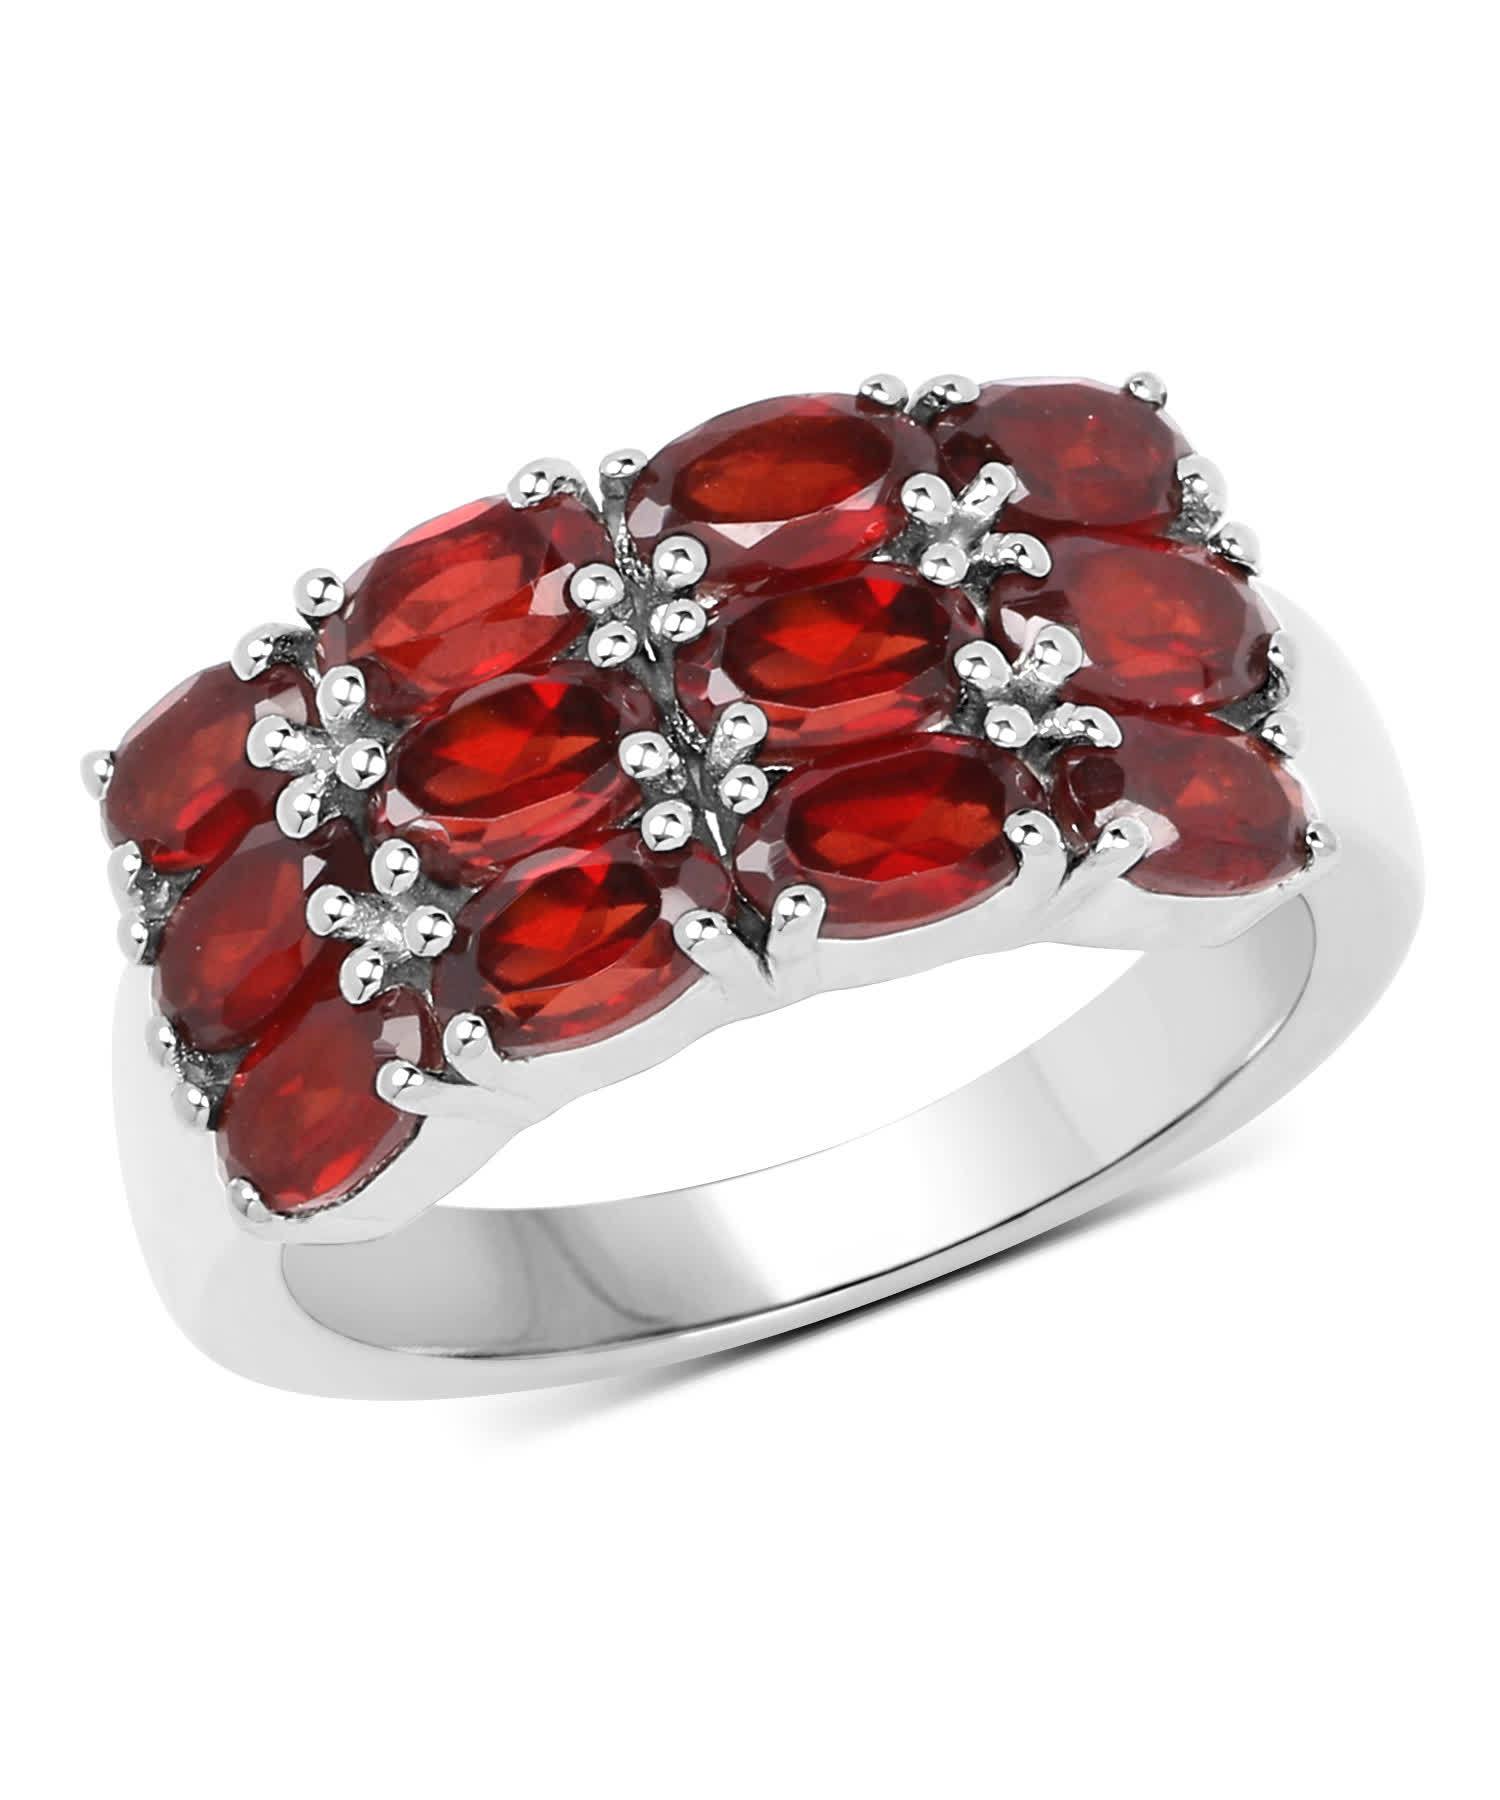 3.84ctw Natural Garnet Rhodium Plated 925 Sterling Silver Right Hand Ring View 1